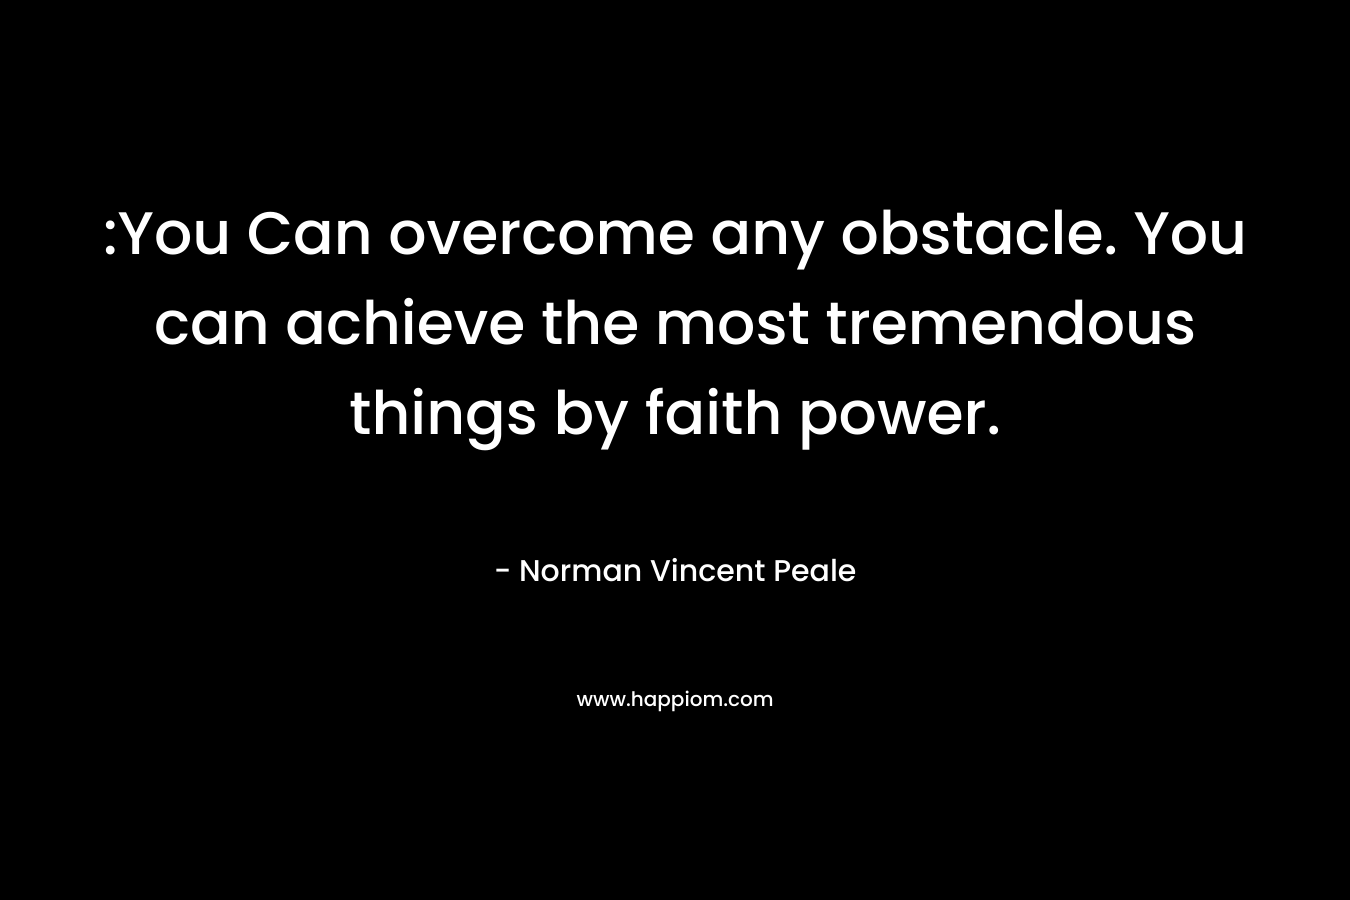 :You Can overcome any obstacle. You can achieve the most tremendous things by faith power.